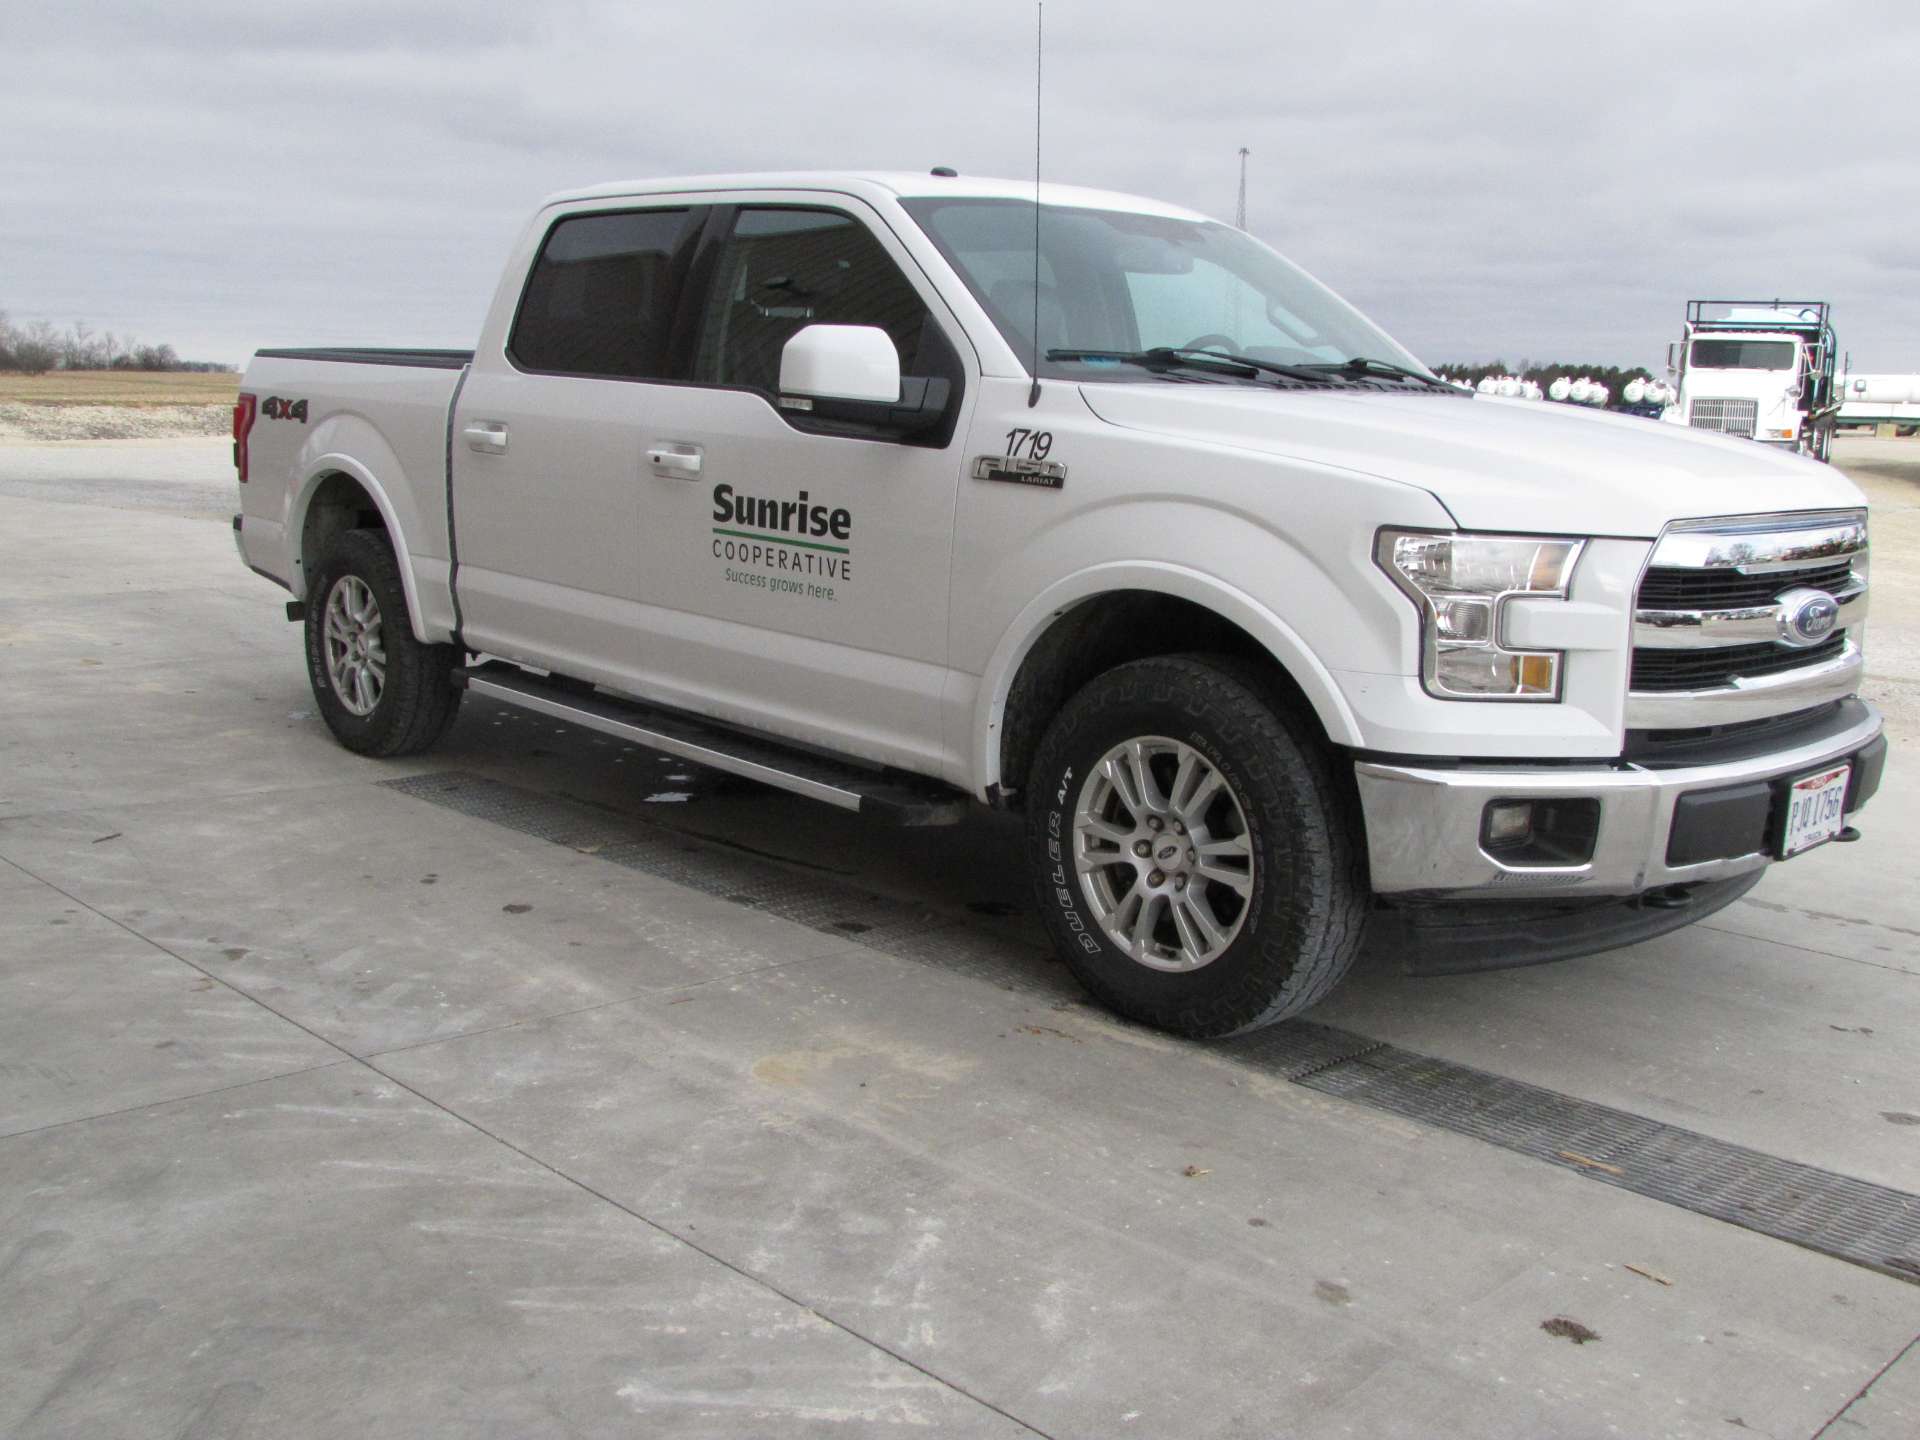 2017 Ford F-150 Lariat pickup truck - Image 15 of 54